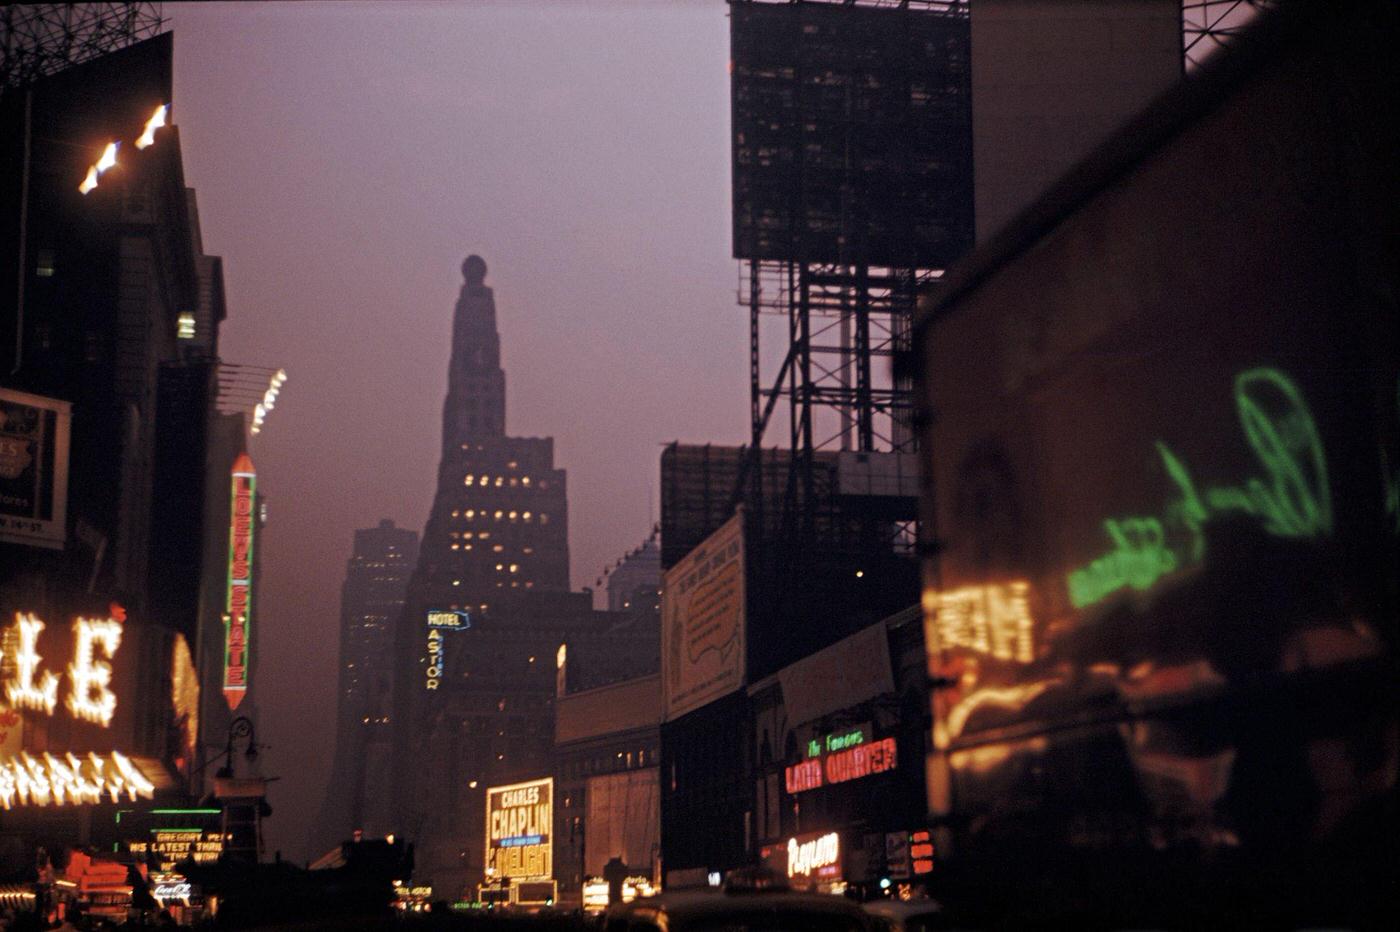 Theater District, Loew'S State Theater And Criterion Theater At Night, Broadway, Manhattan, 1950S.